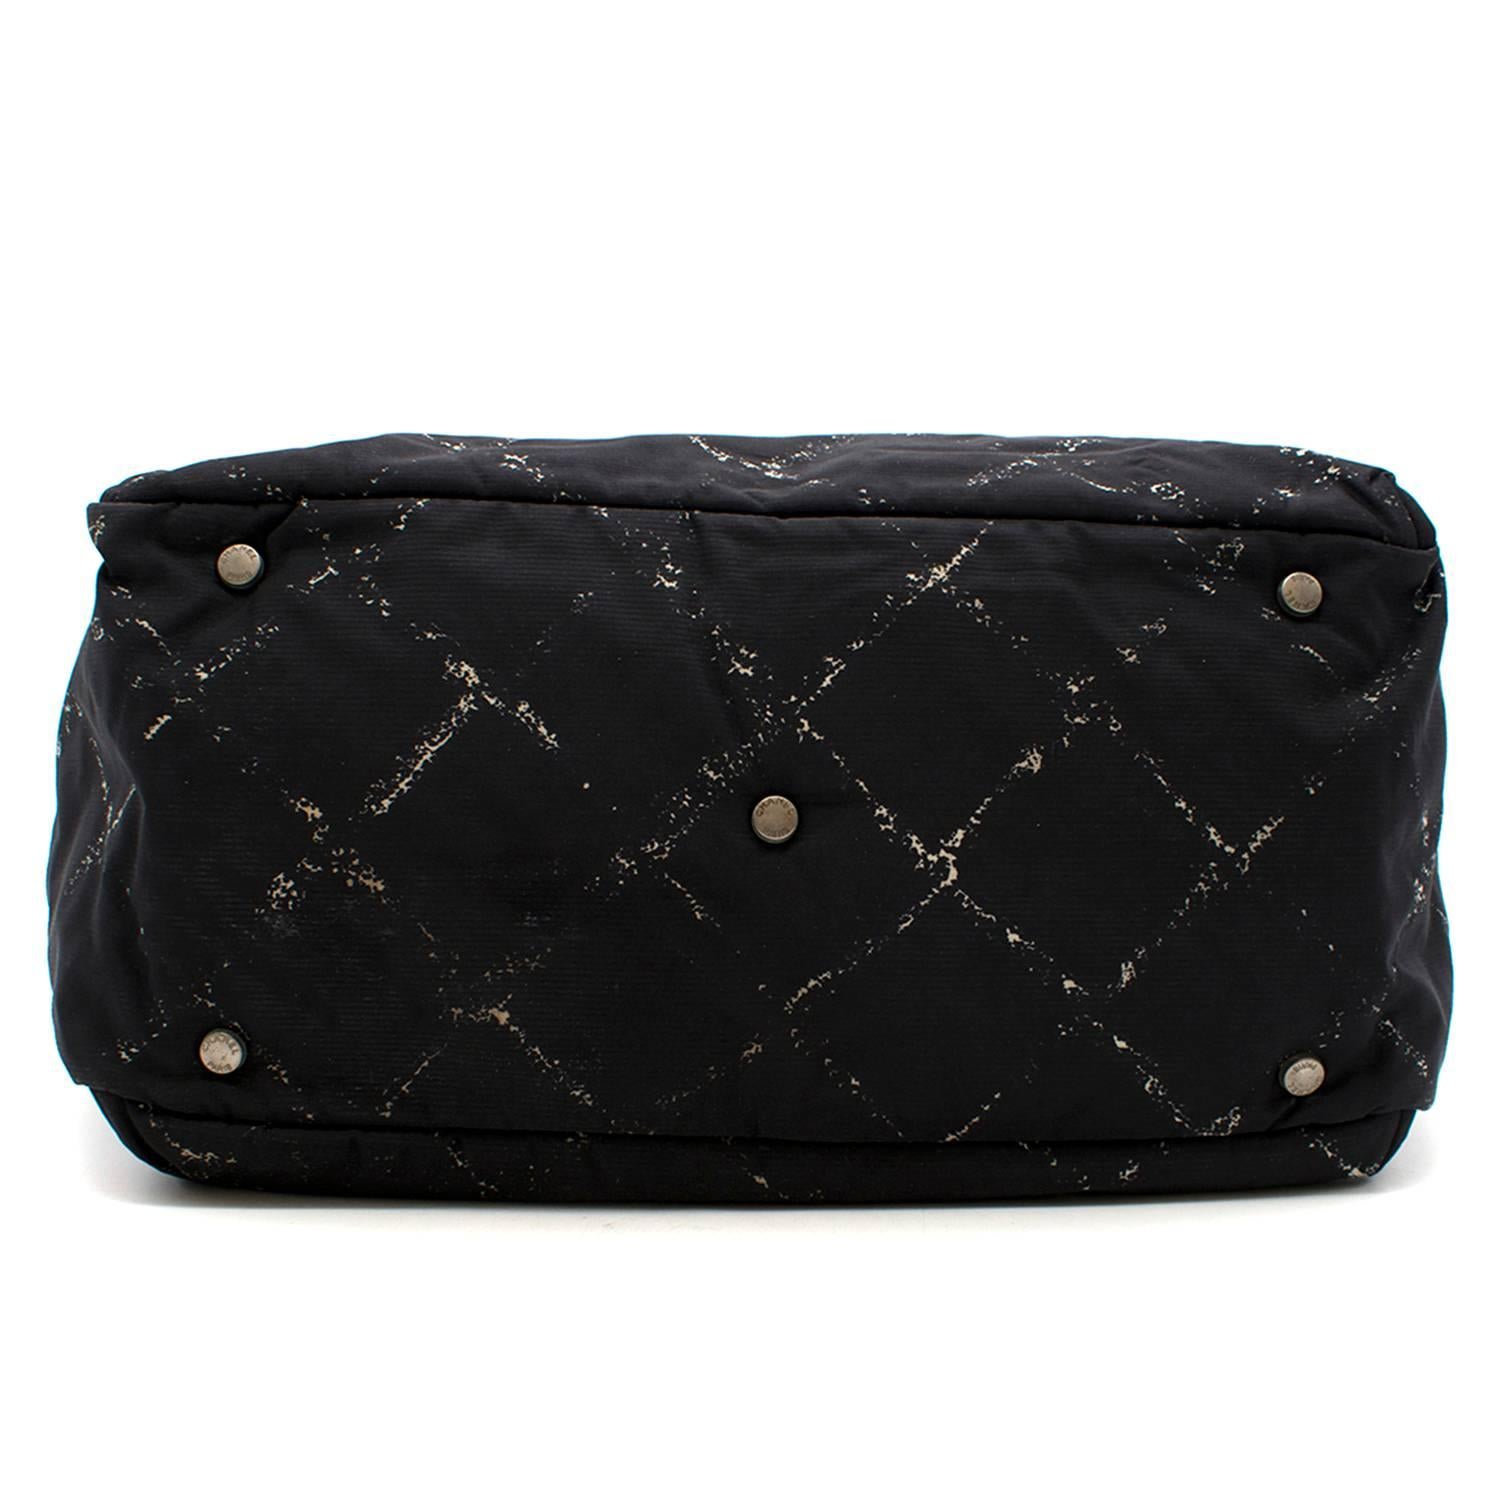 Chanel Black Criss Cross Large Tote Duffle Bag In Excellent Condition For Sale In London, GB